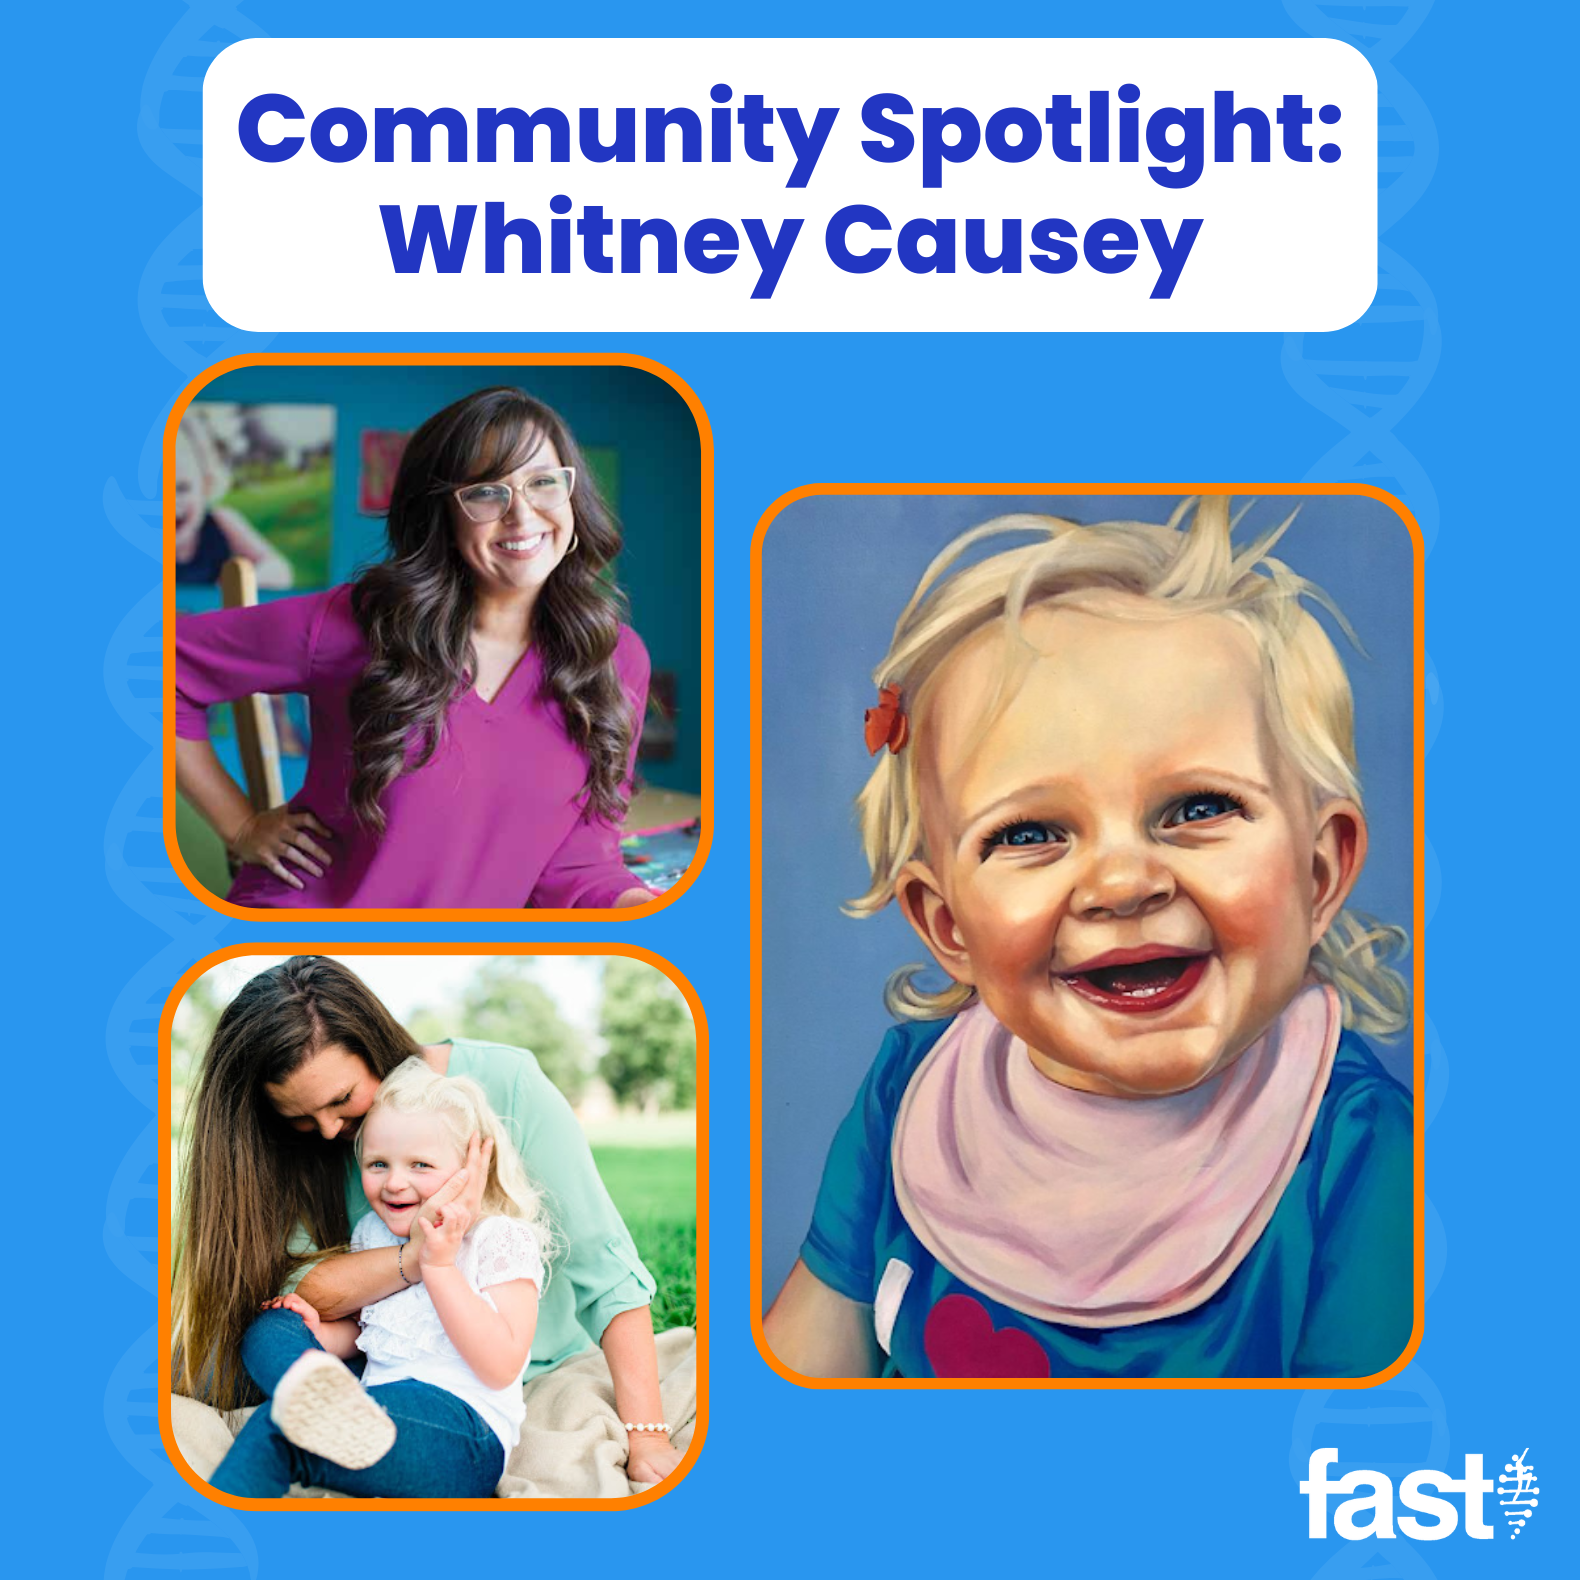 Community Spotlight: Whitney Causey - with a photo of Whitney posing, a photo of Whitney embracing her daughter M'Lynn, and Whitney's painting of M'Lynn